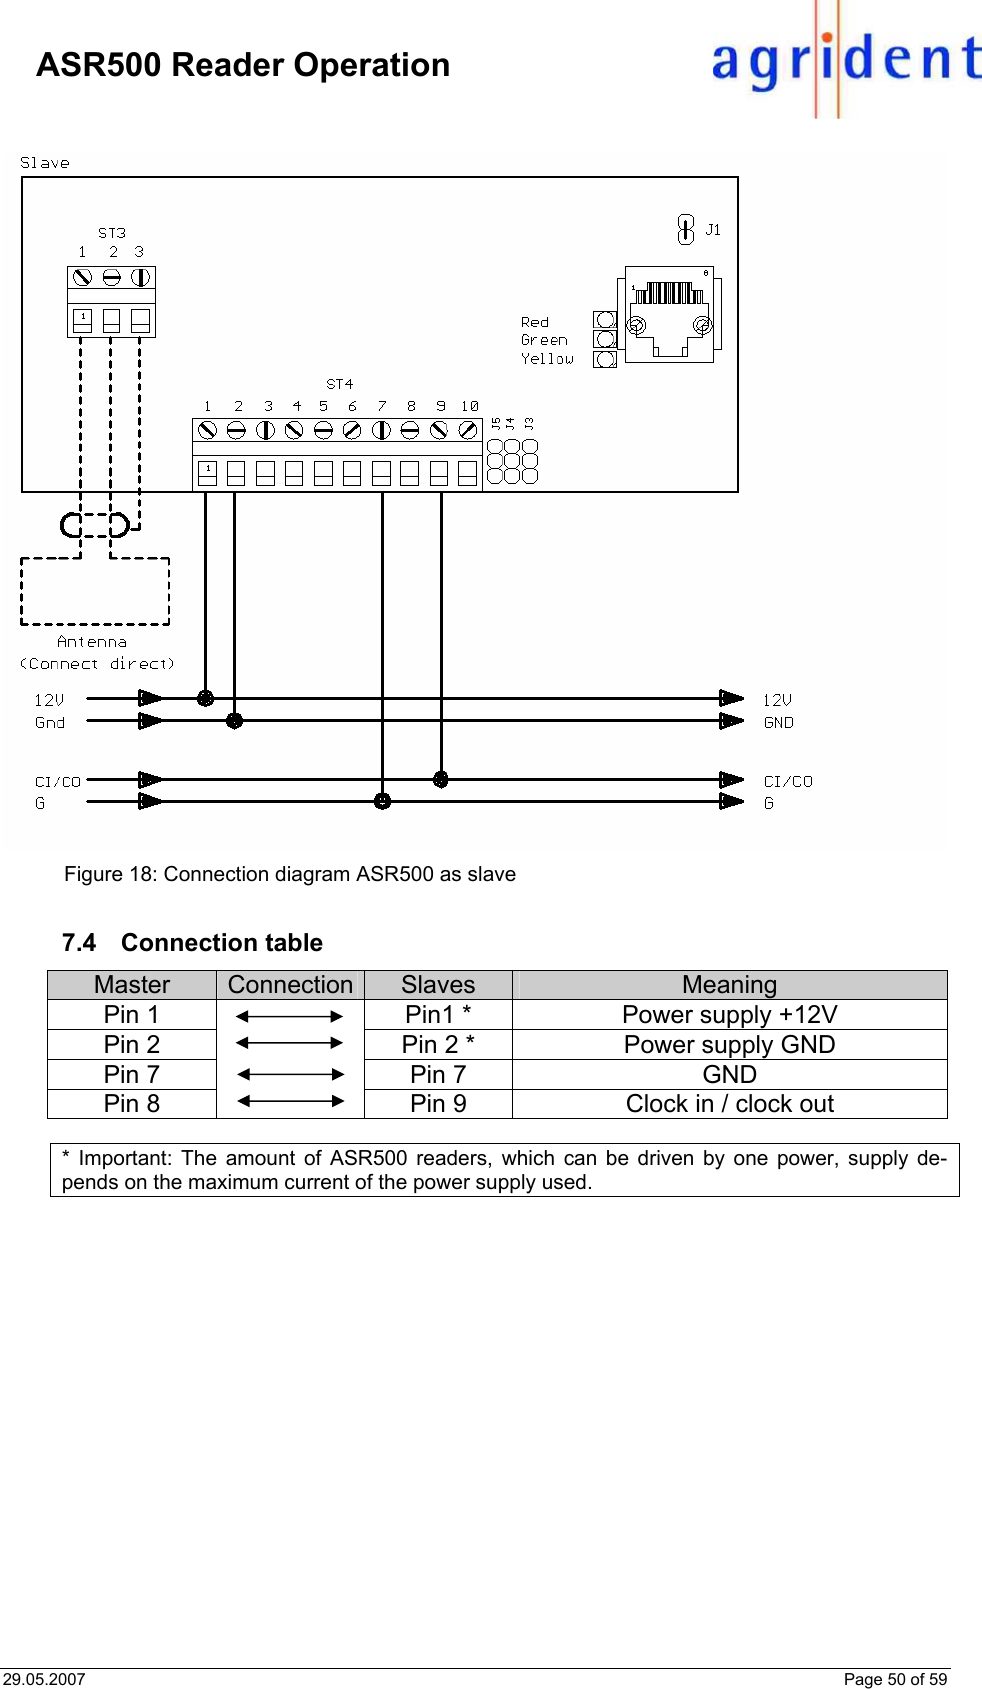 29.05.2007    Page 50 of 59     ASR500 Reader Operation   Figure 18: Connection diagram ASR500 as slave  7.4 Connection table Master  Connection  Slaves  Meaning Pin 1  Pin1 *  Power supply +12V Pin 2  Pin 2 *  Power supply GND Pin 7  Pin 7  GND Pin 8  Pin 9  Clock in / clock out  * Important: The amount of ASR500 readers, which can be driven by one power, supply de-pends on the maximum current of the power supply used. 